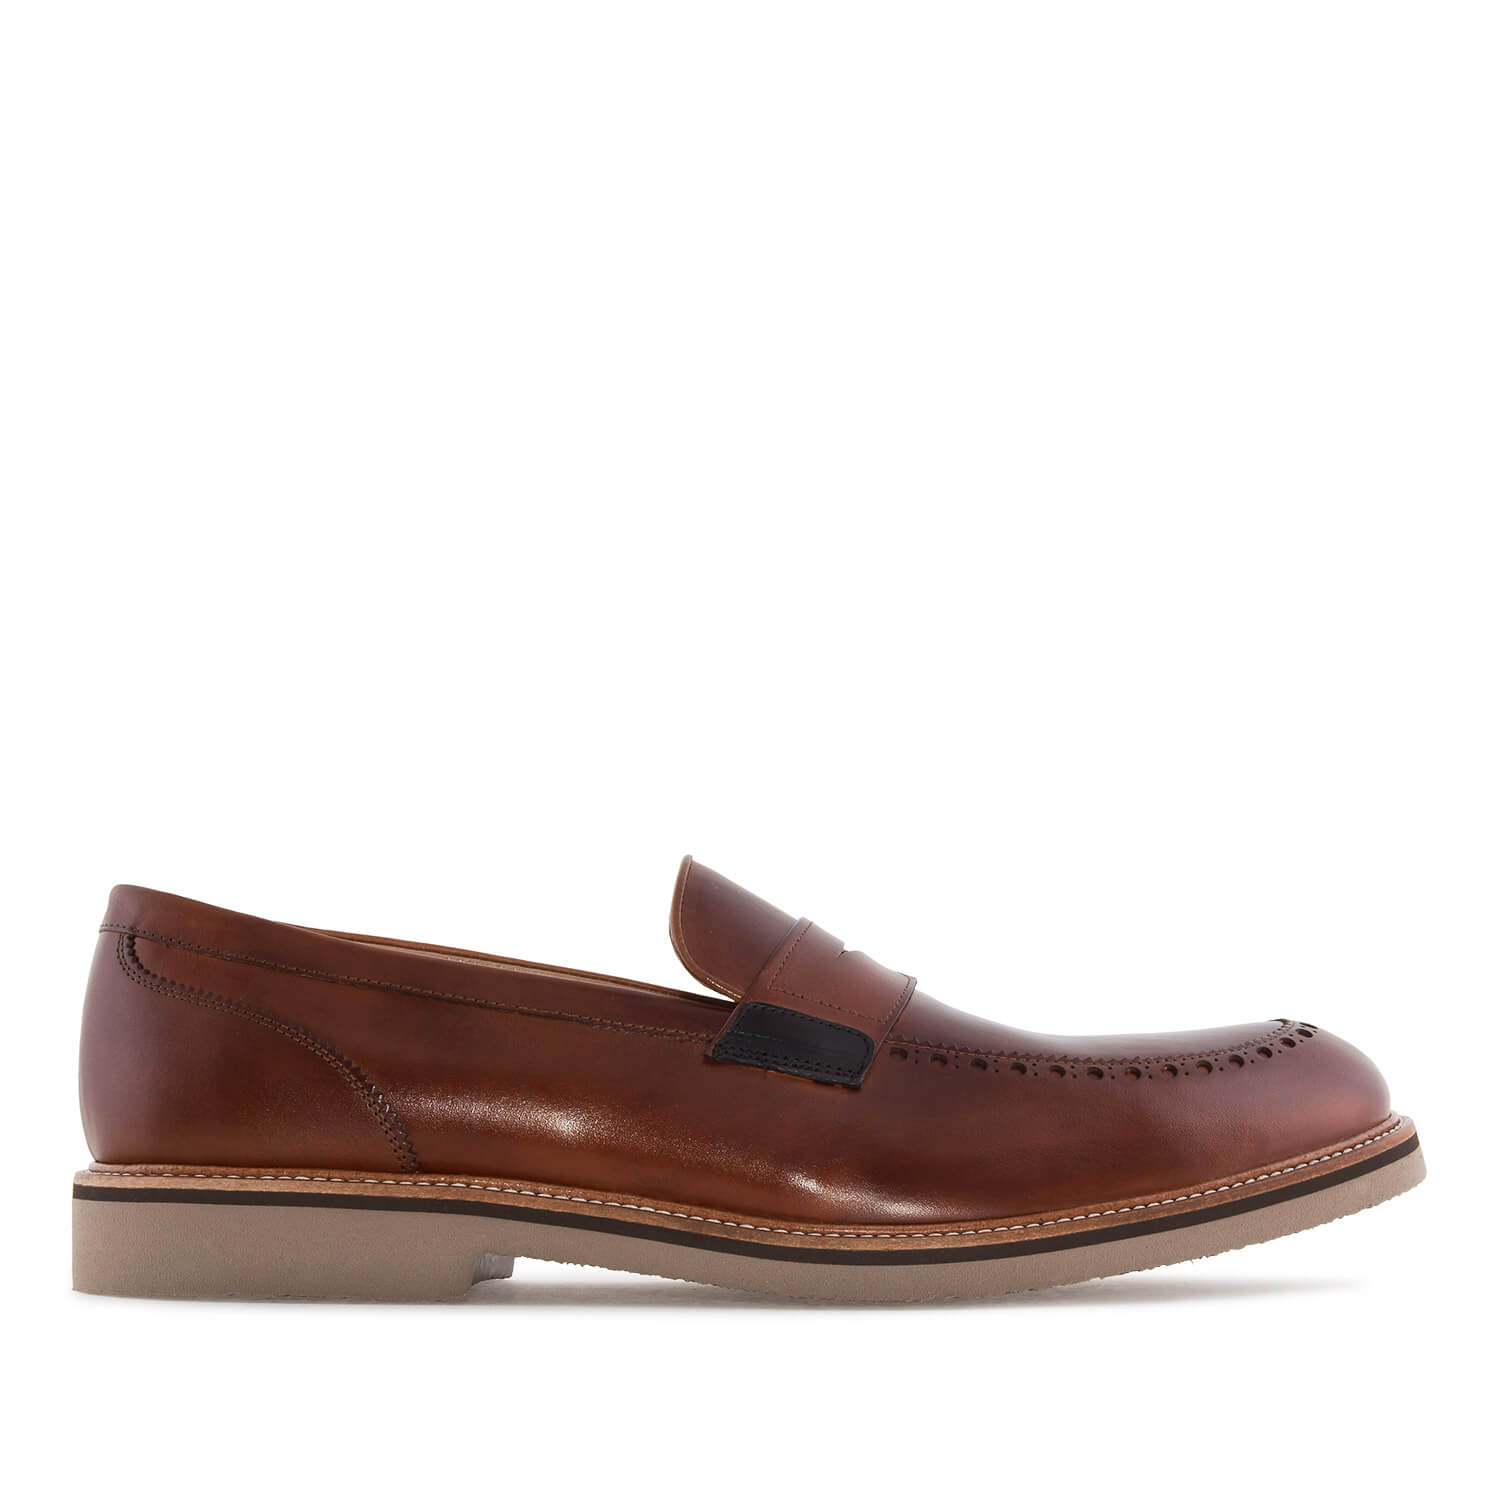 Men's Moccasins in Mahogany coloured Leather 